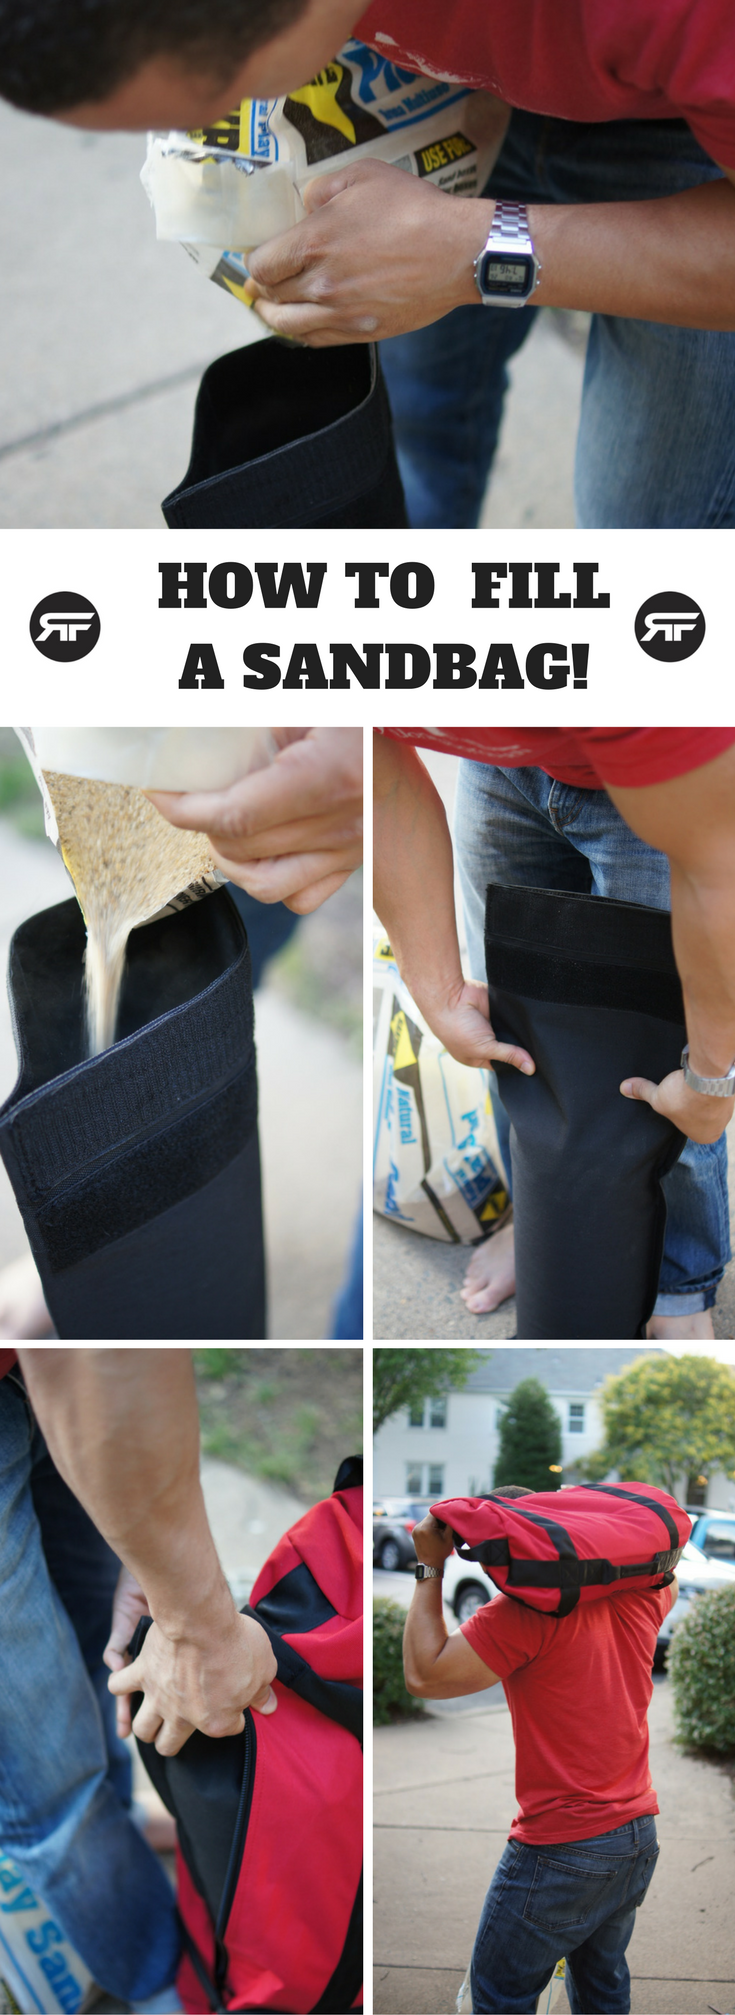 Rep Fitness How to Fill Your Sandbag Pinterest Image 1 (1)